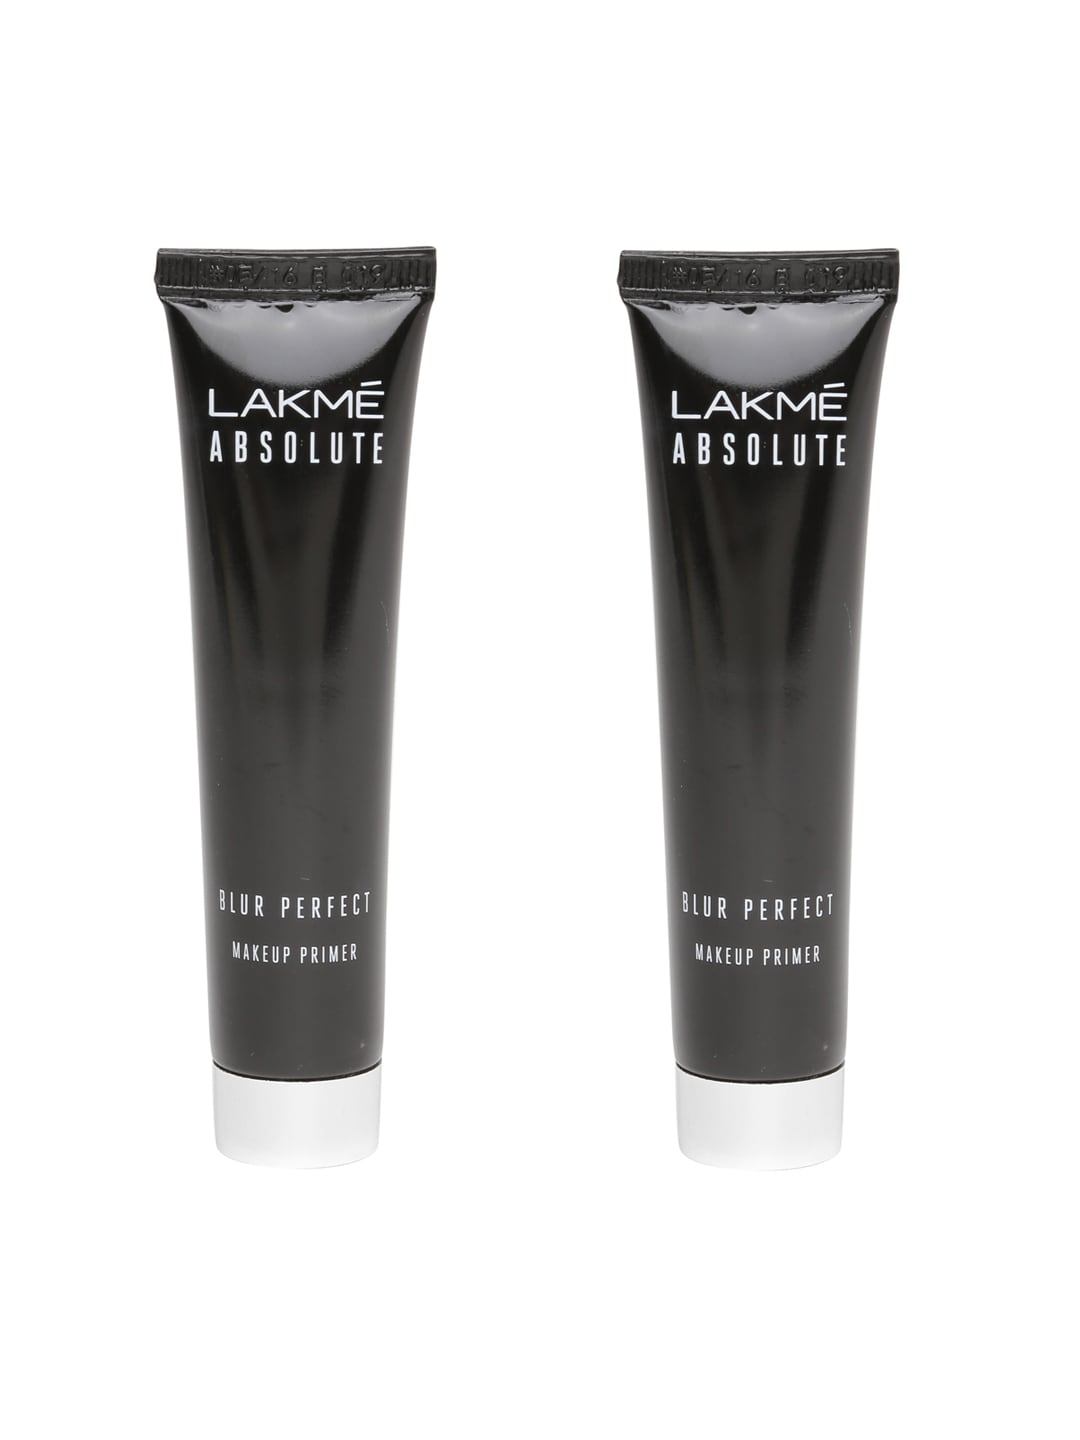 Lakme Set of 2 Absolute Blur Perfect Makeup Primer Price in India